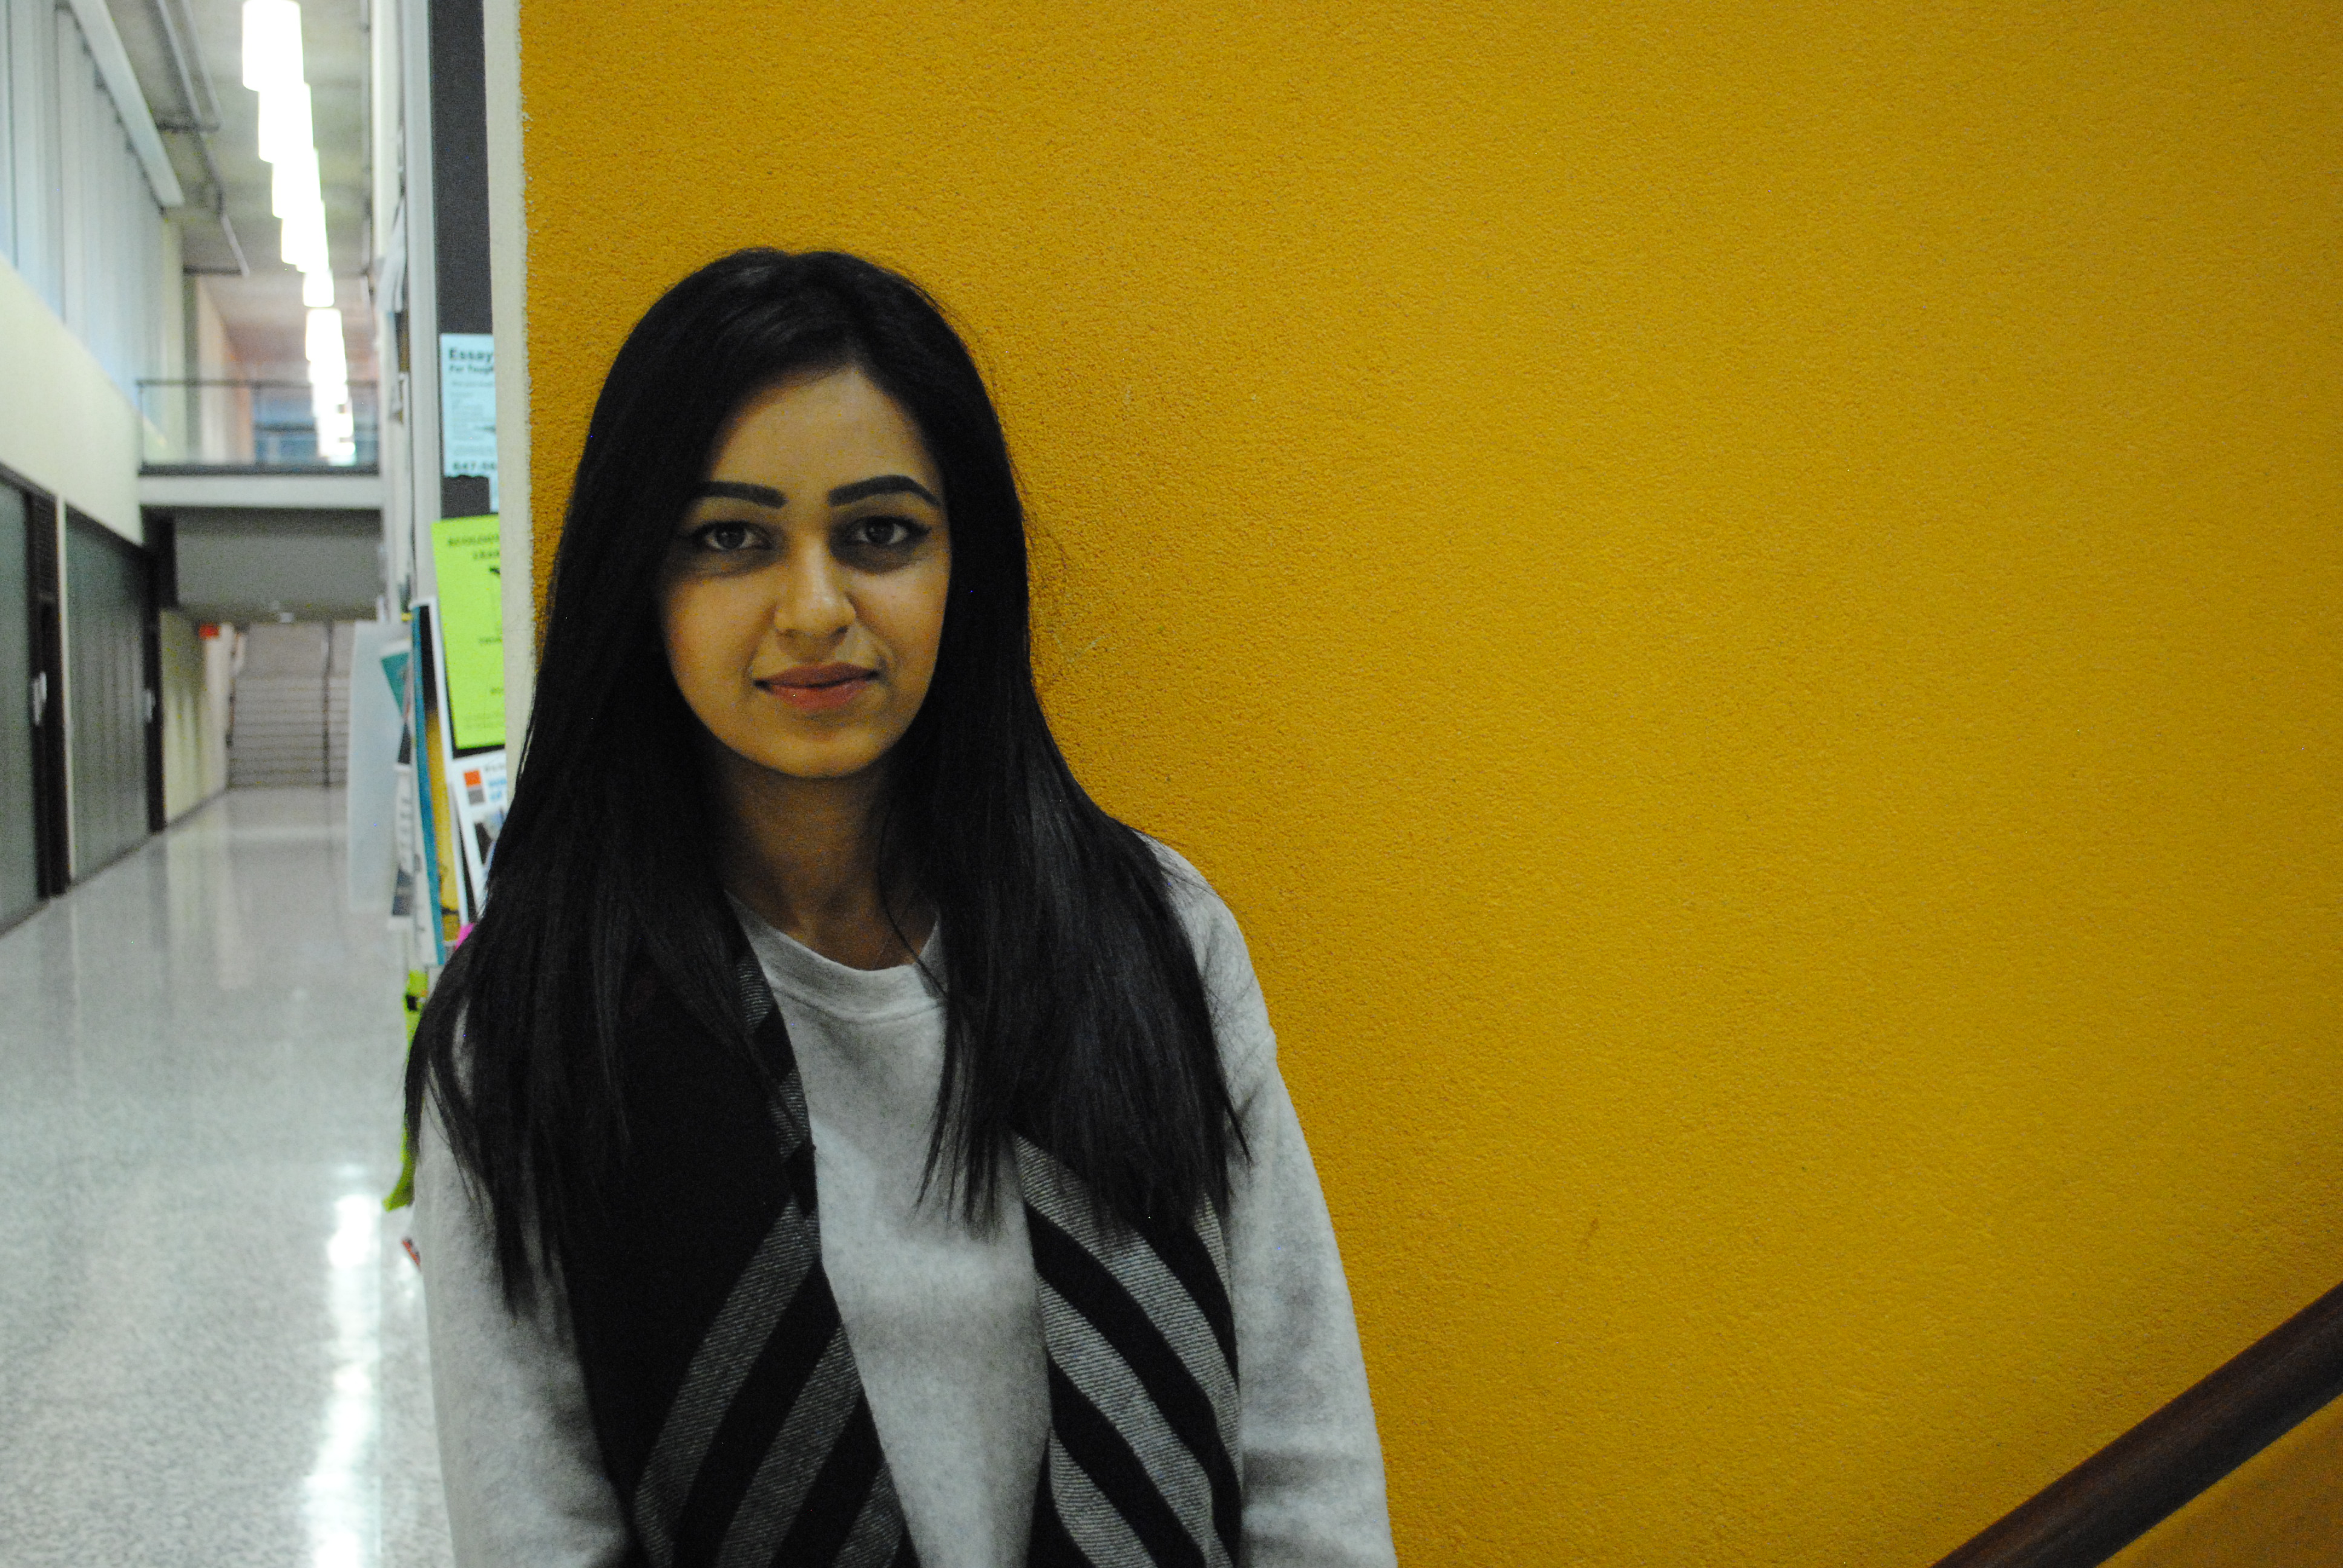 Rida in front of a yellow wall in the Bahen building.